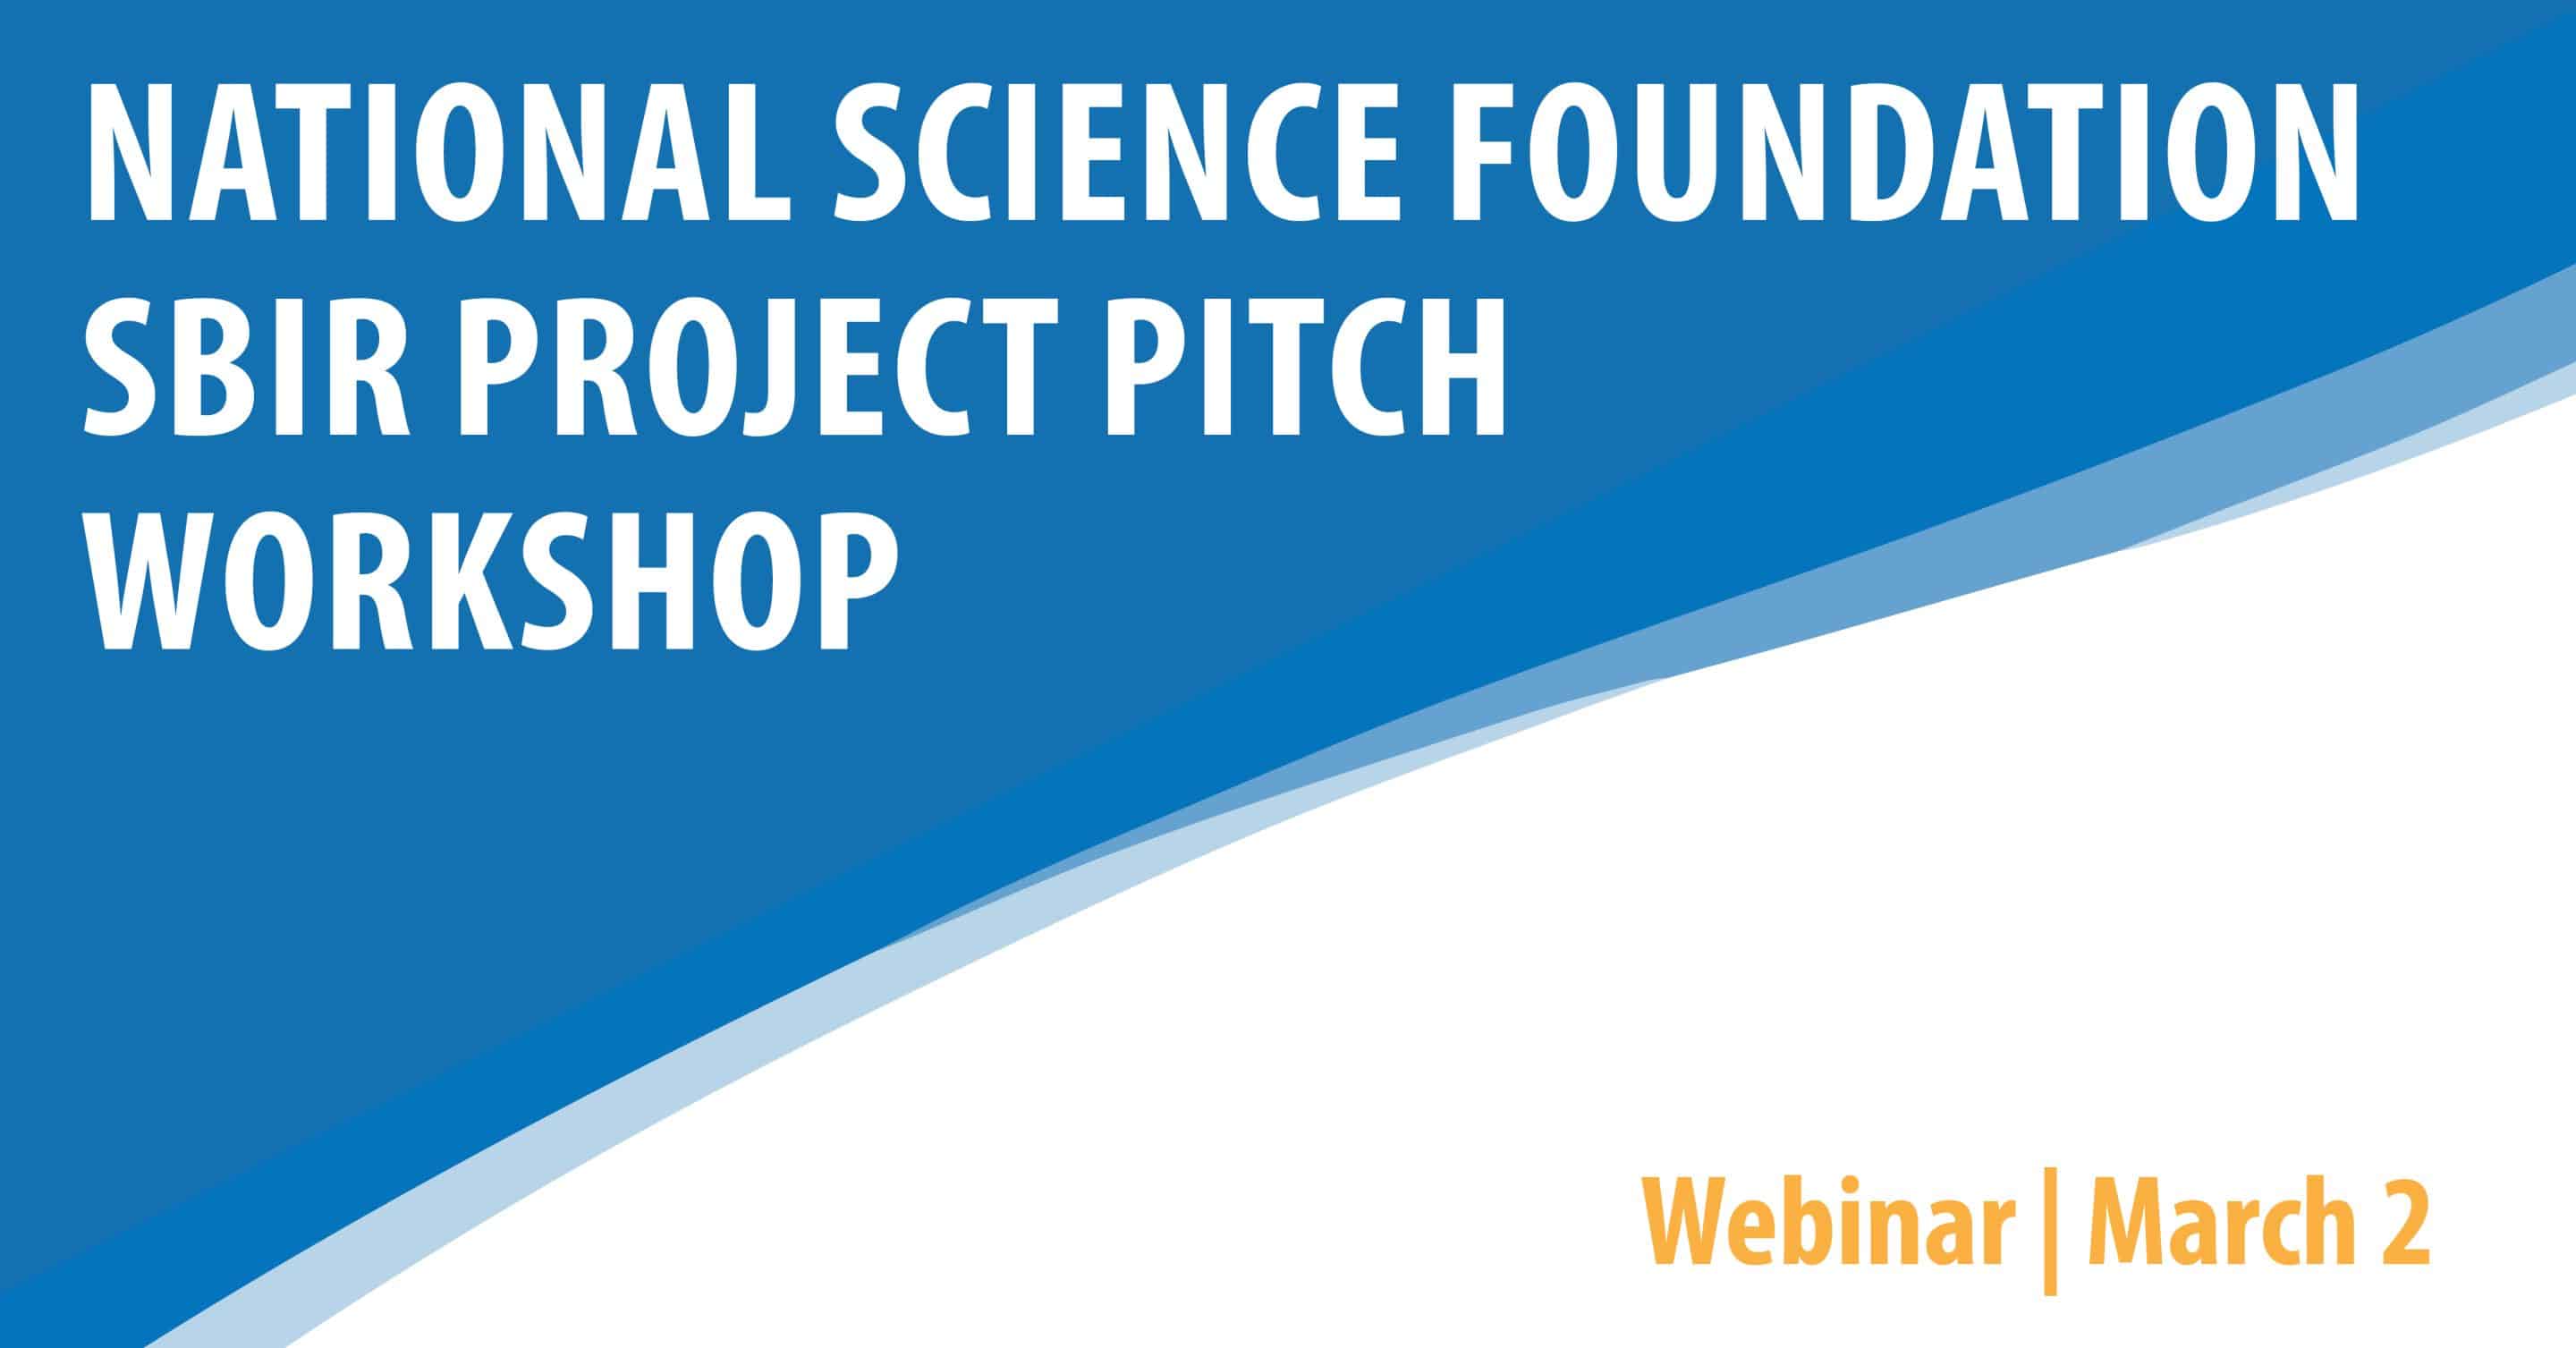 National Science Foundation SBIR Project Pitch Workshop